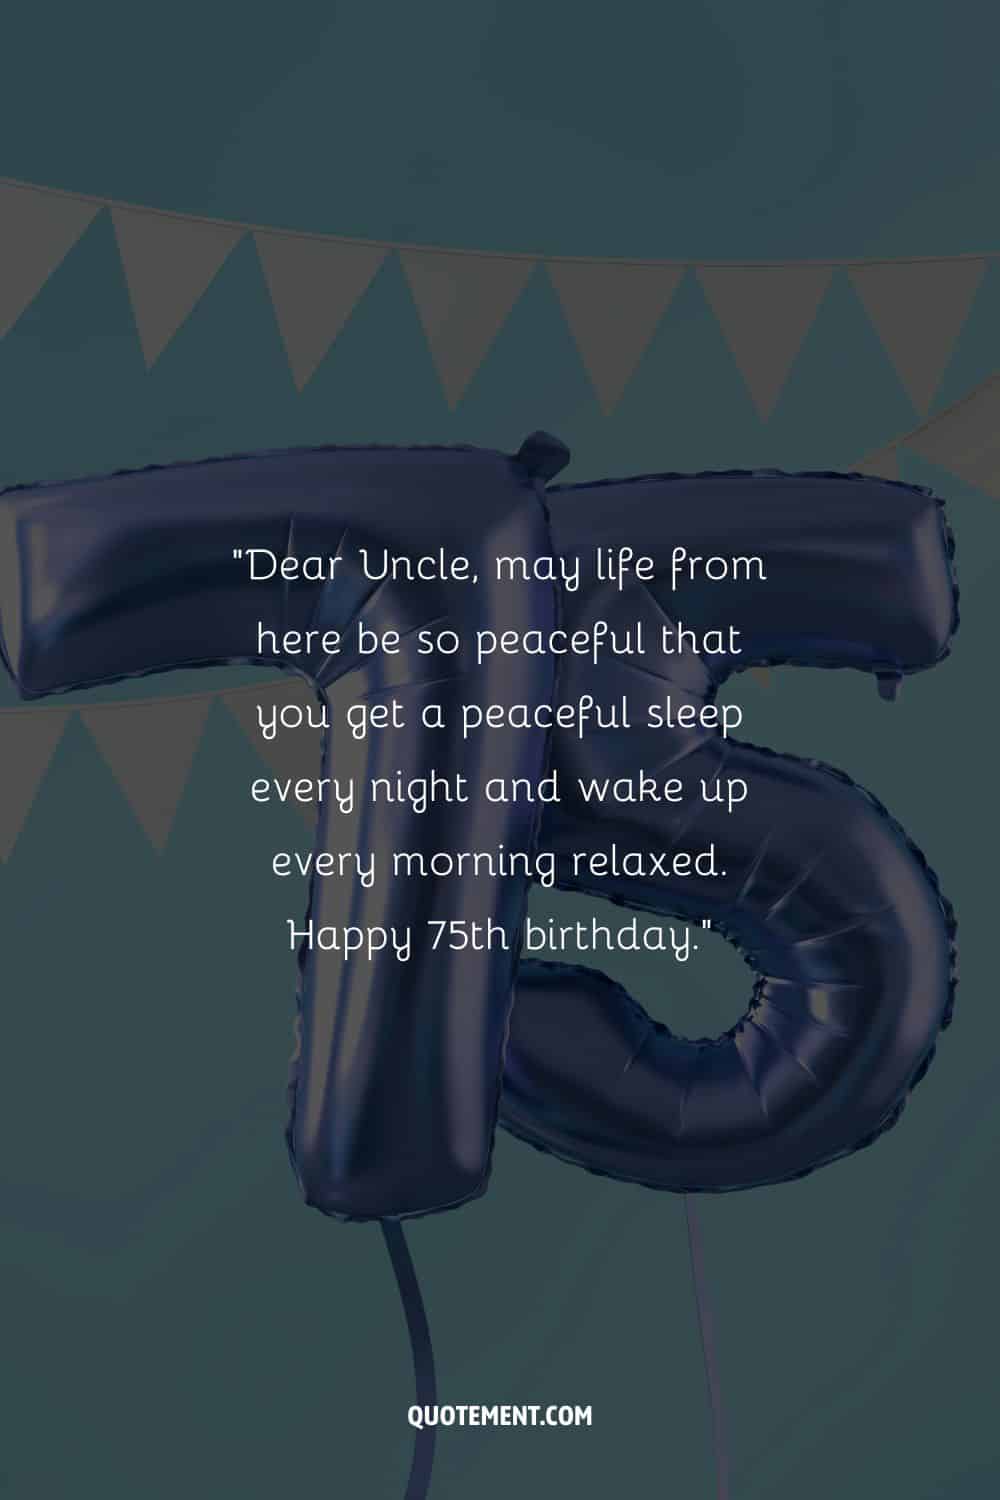 “Dear Uncle, may life from here be so peaceful that you get a peaceful sleep every night and wake up every morning relaxed. Happy 75th birthday.”